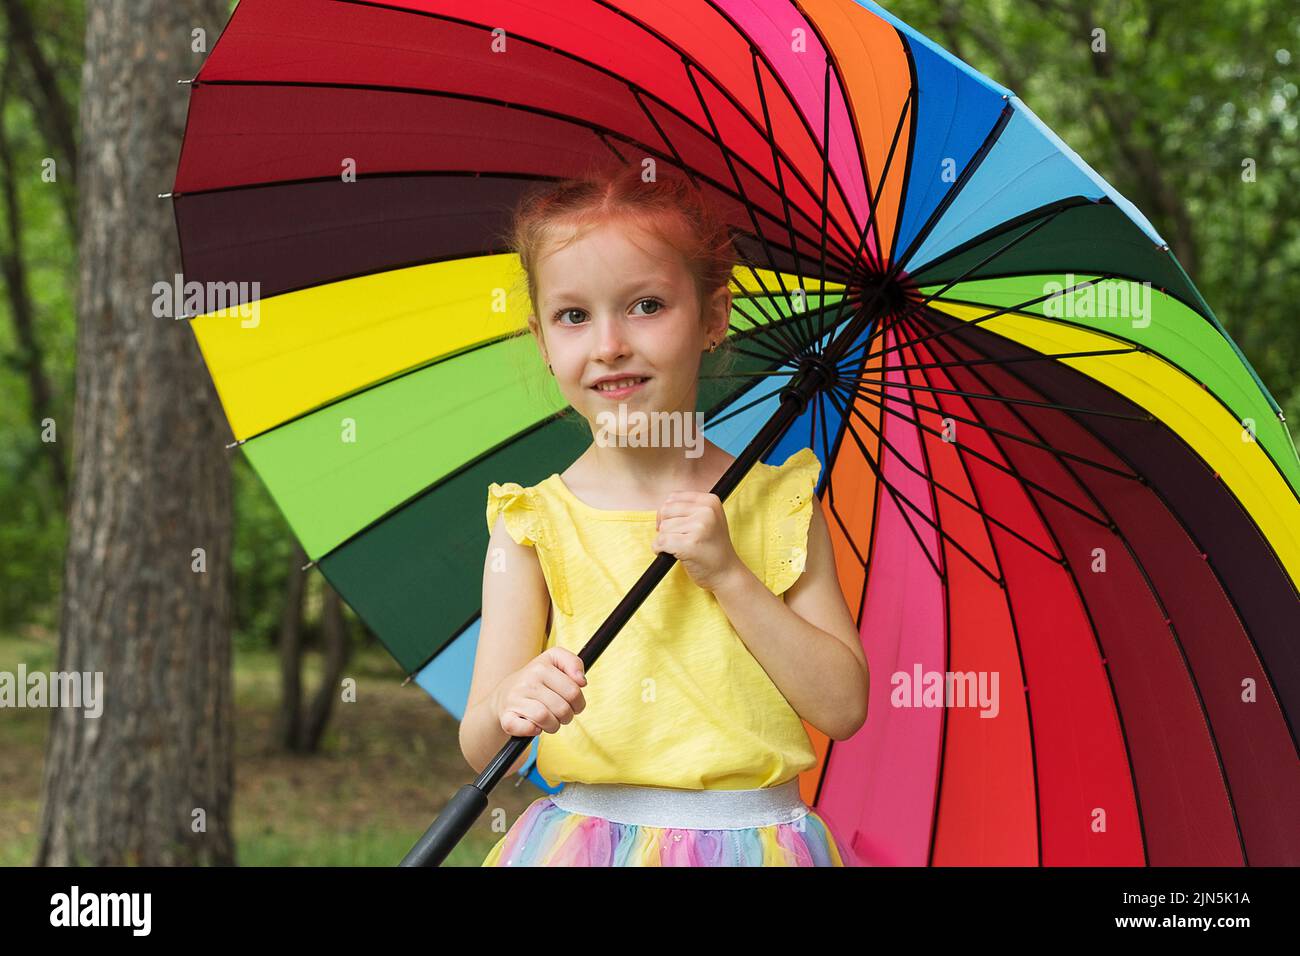 Happy funny girl holding rainbow umbrella. Cute Happy schoolgirl playing in rainy summer park. Kid walking in autumn shower. Outdoor fun by any Stock Photo